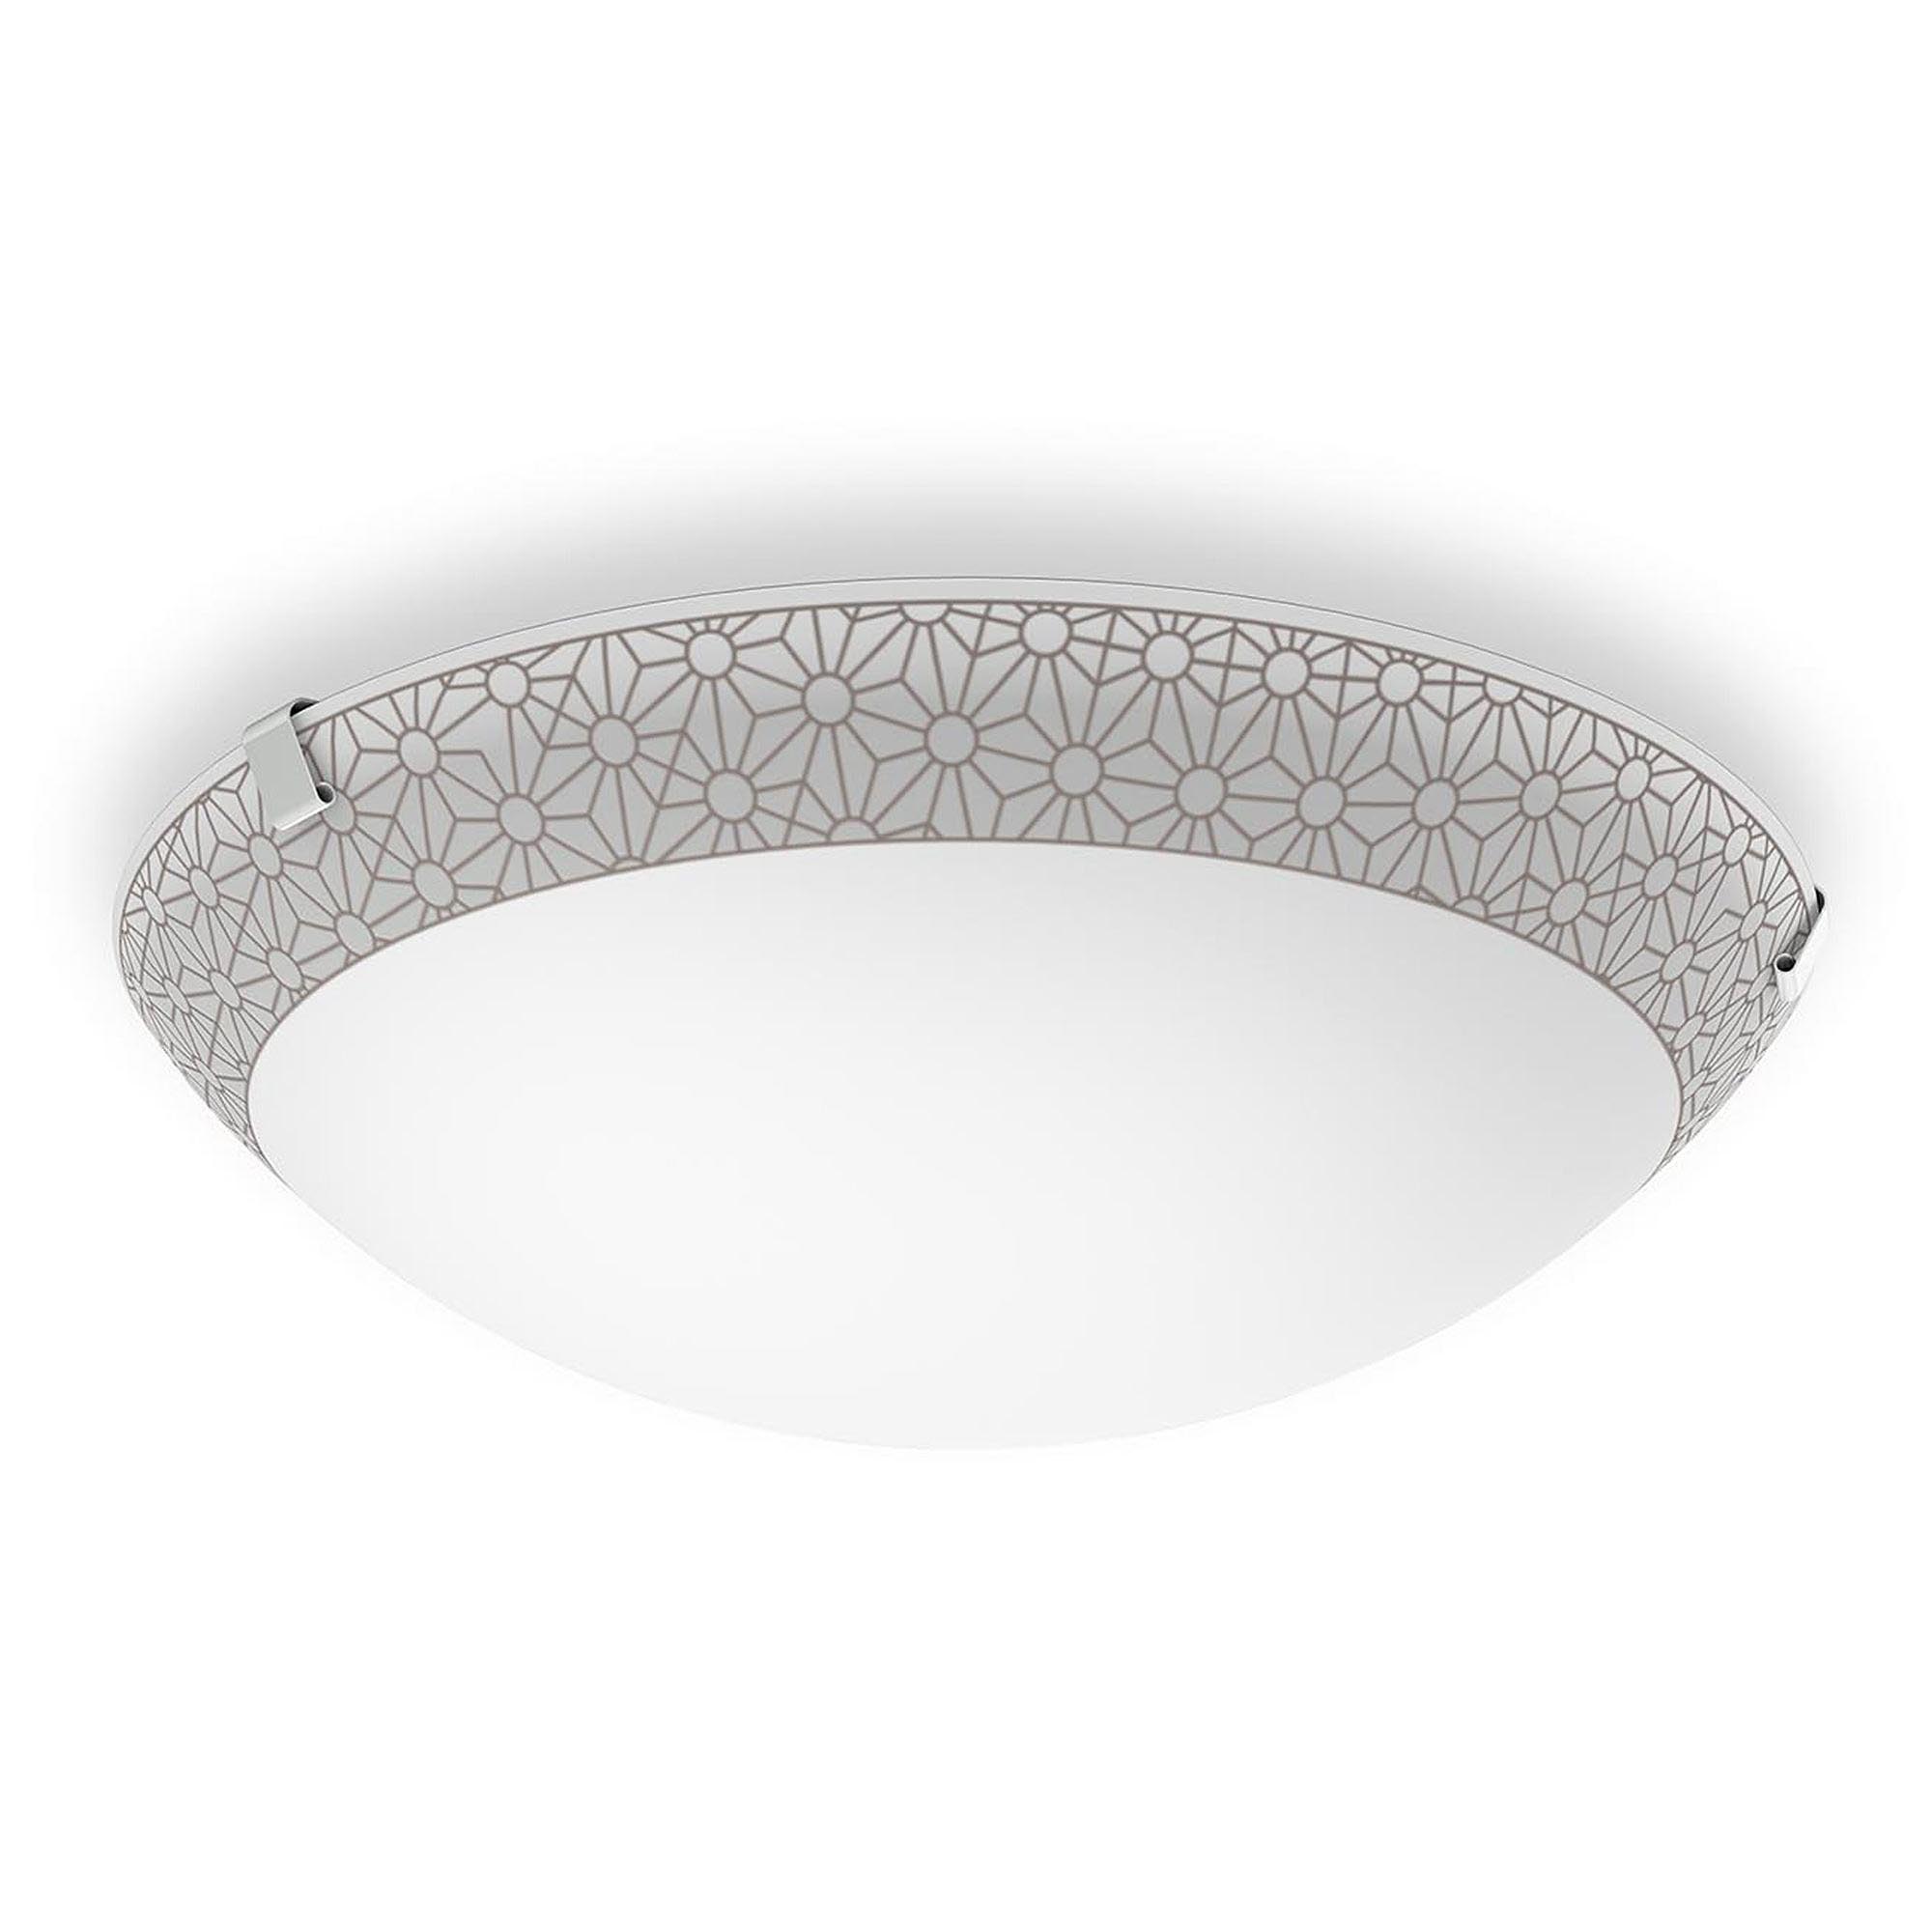 Ceiling LED light PHILIPS myLiving Ballan with rim 2700K 10W 850lm